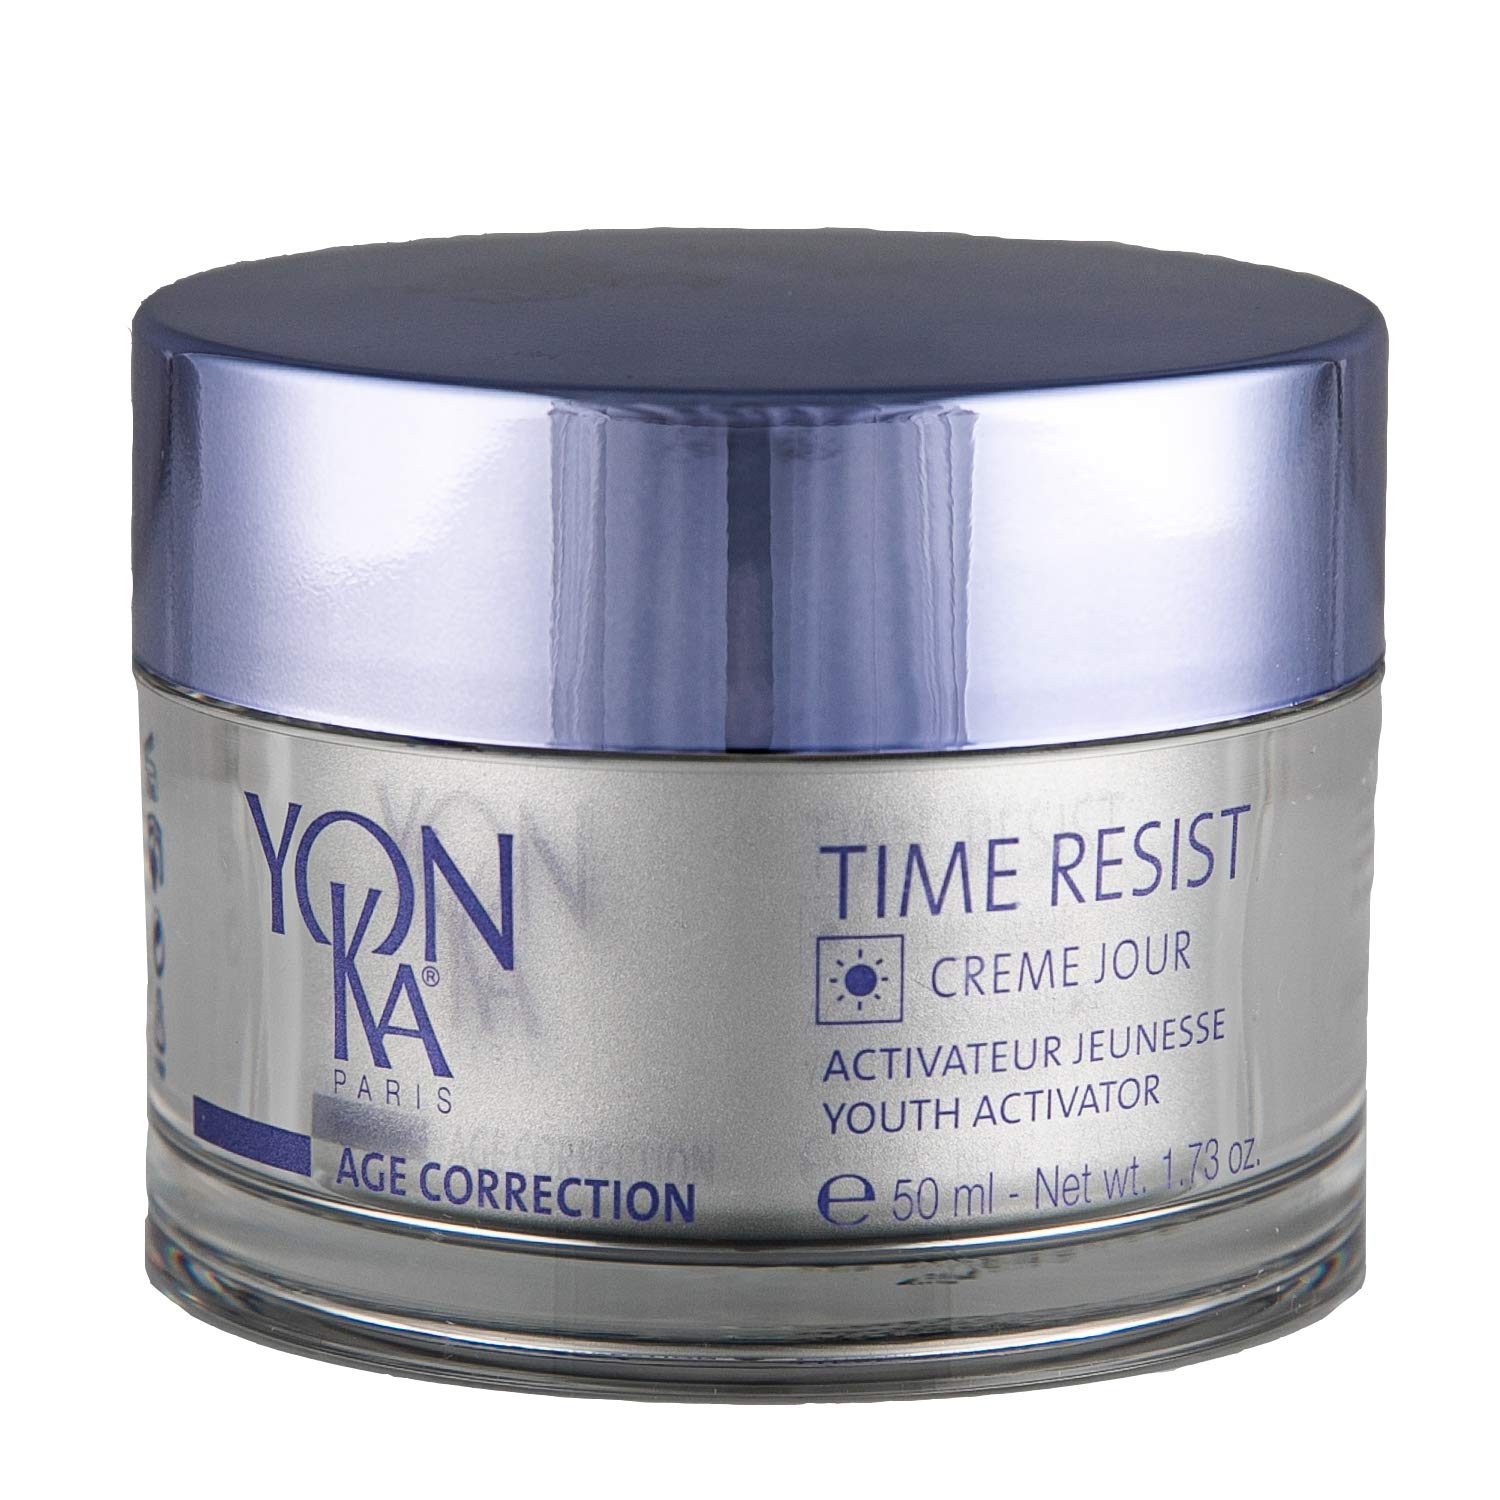 Yon-Ka Time Resist Jour (50ml) Anti-Aging Day Cream with Youth Activating Complex and Hyaluronic Acid, Firming Anti-Wrinkle Moisturizer for Face an...